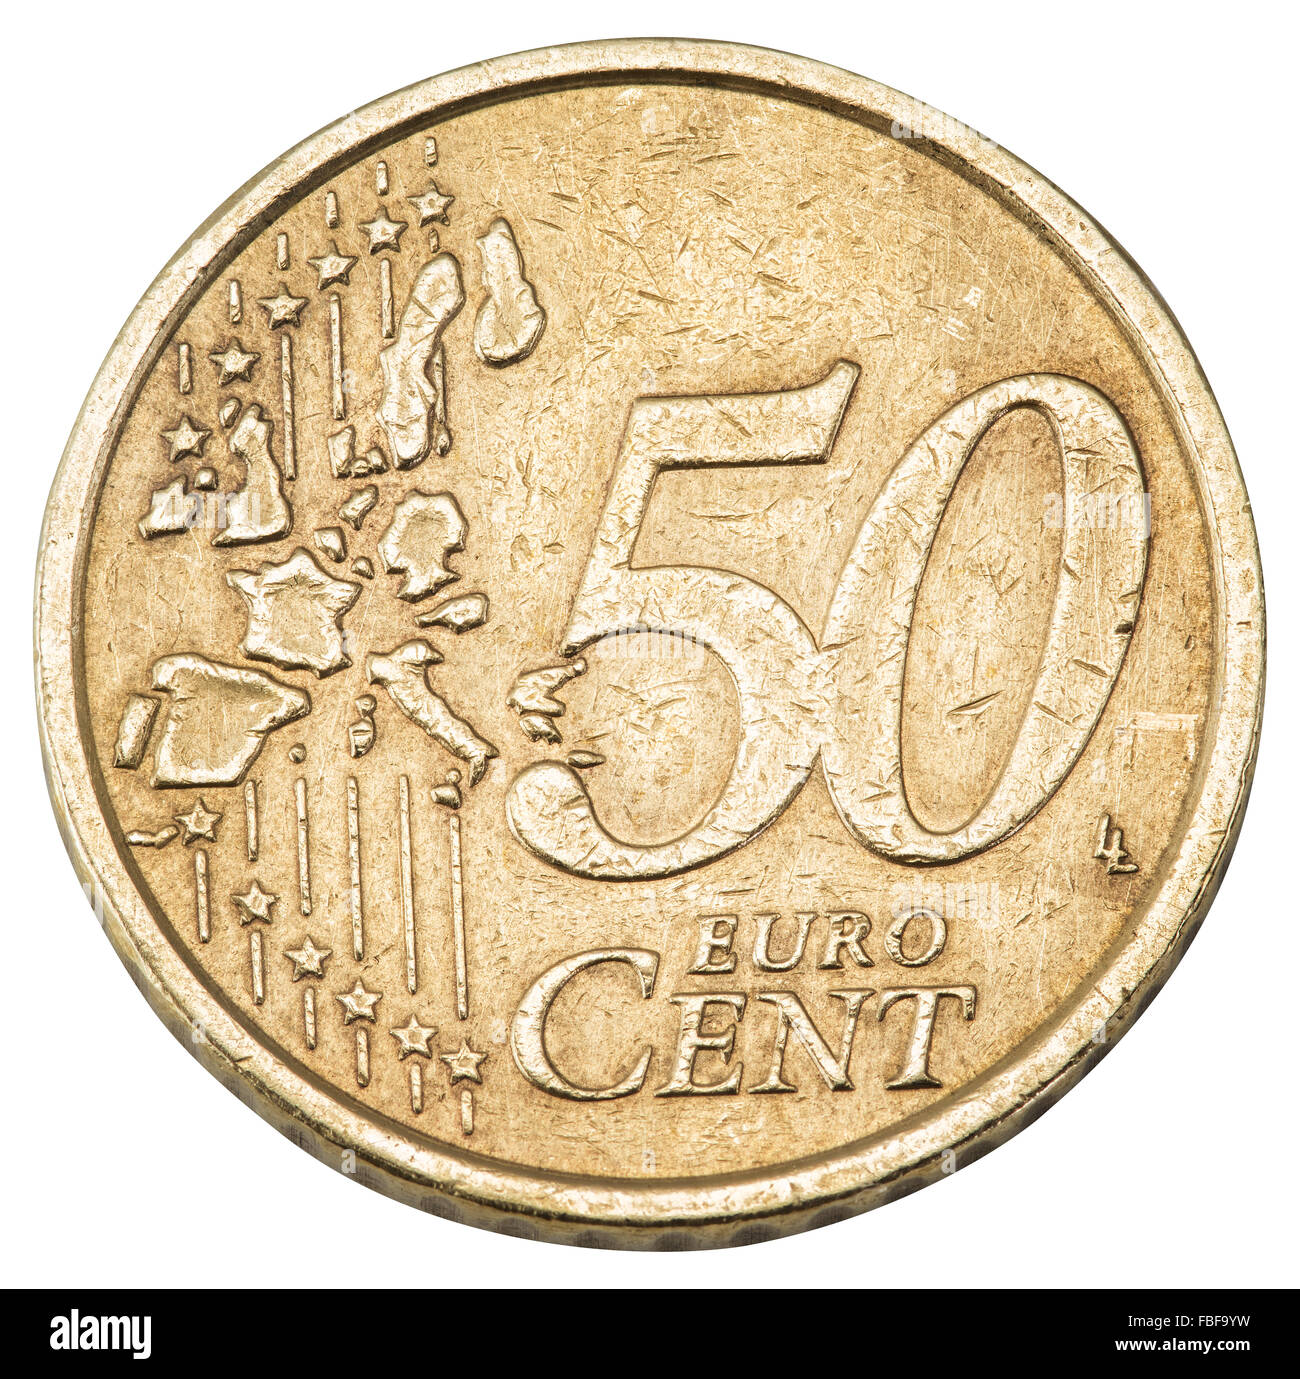 Old fifty cents euro coin isolated on a white background. File contains clipping paths. Stock Photo